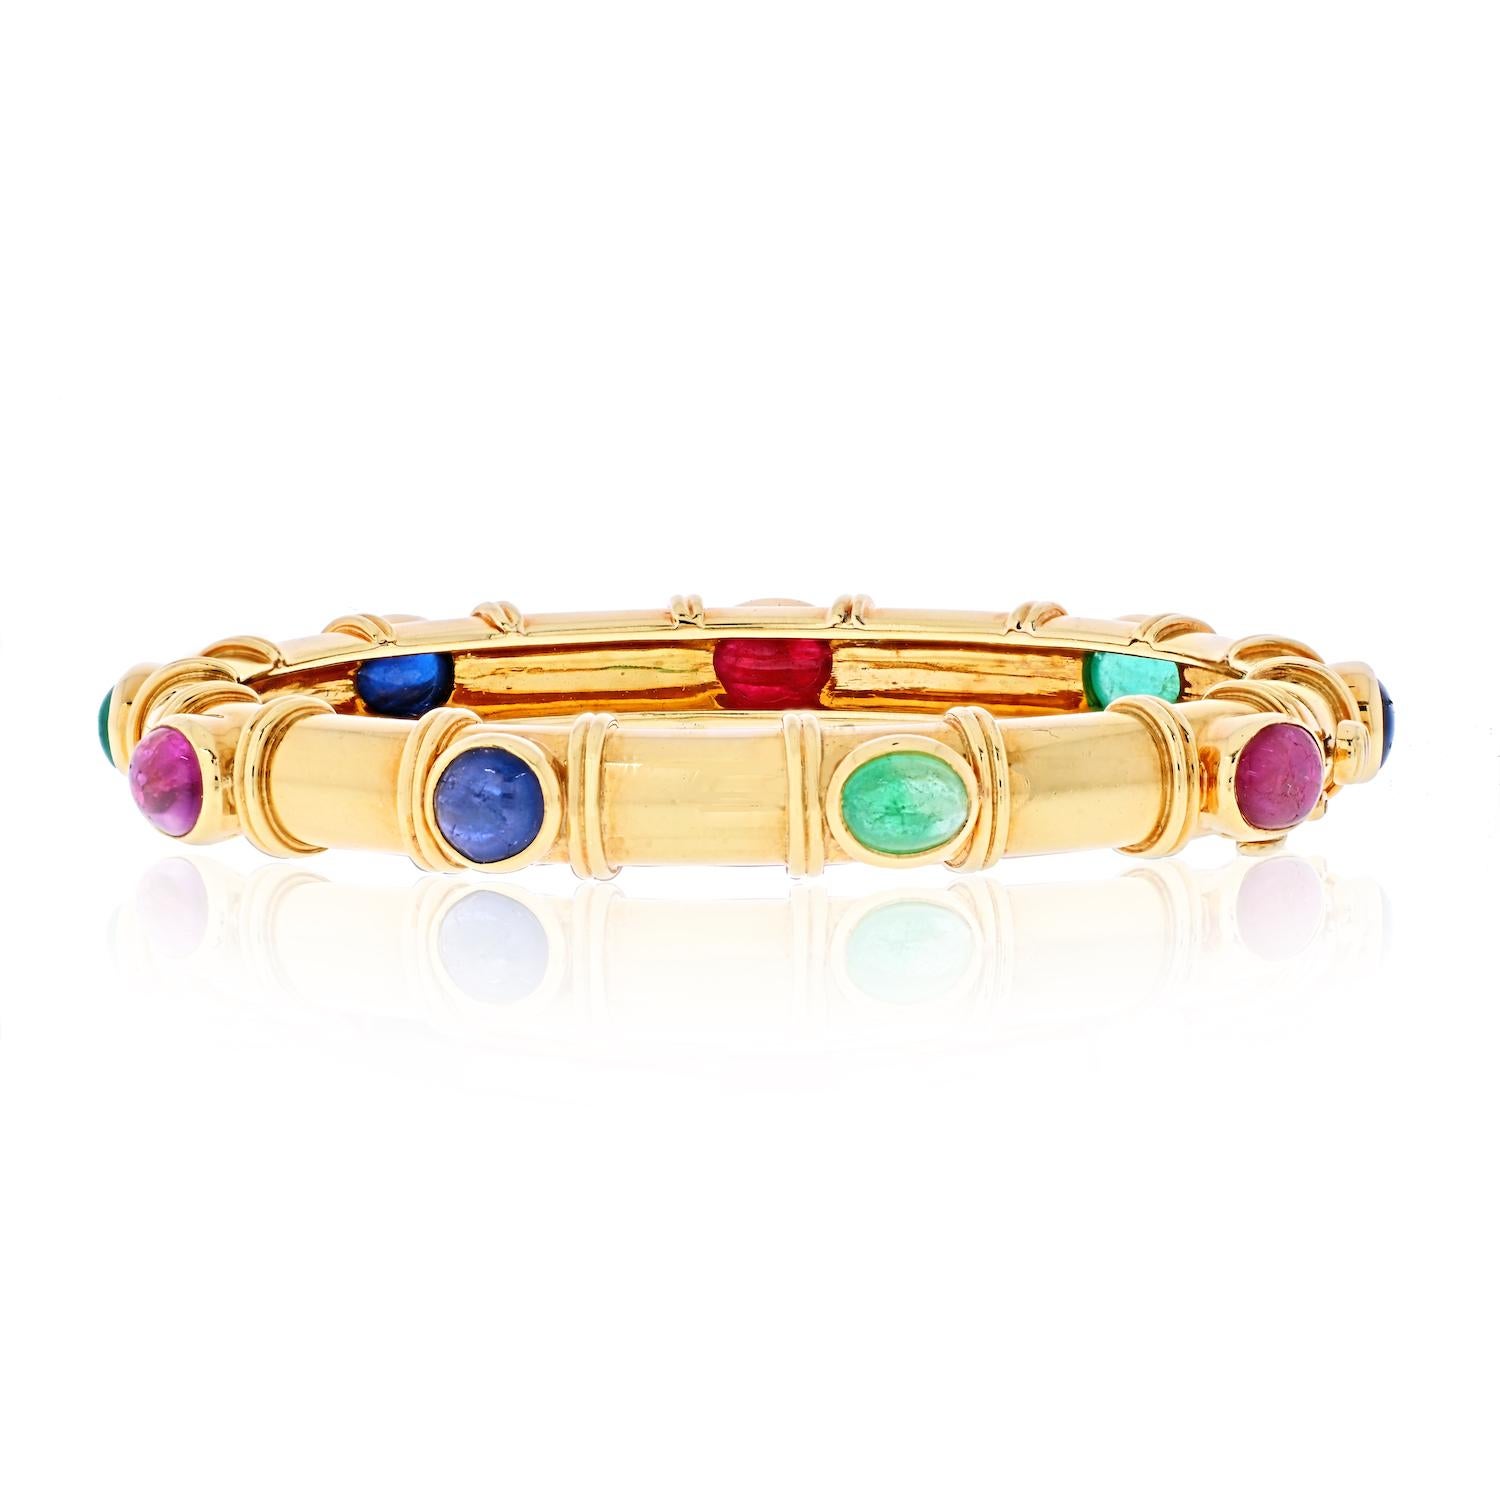 18K yellow gold David Webb gemstone ladies bangle bracelet. This piece is set with nine multi colored gemstones, oval cut cabochon rubies, sapphires and emeralds. Designed with a hinged lock for easy wear it is elegant and minimalist, combined with